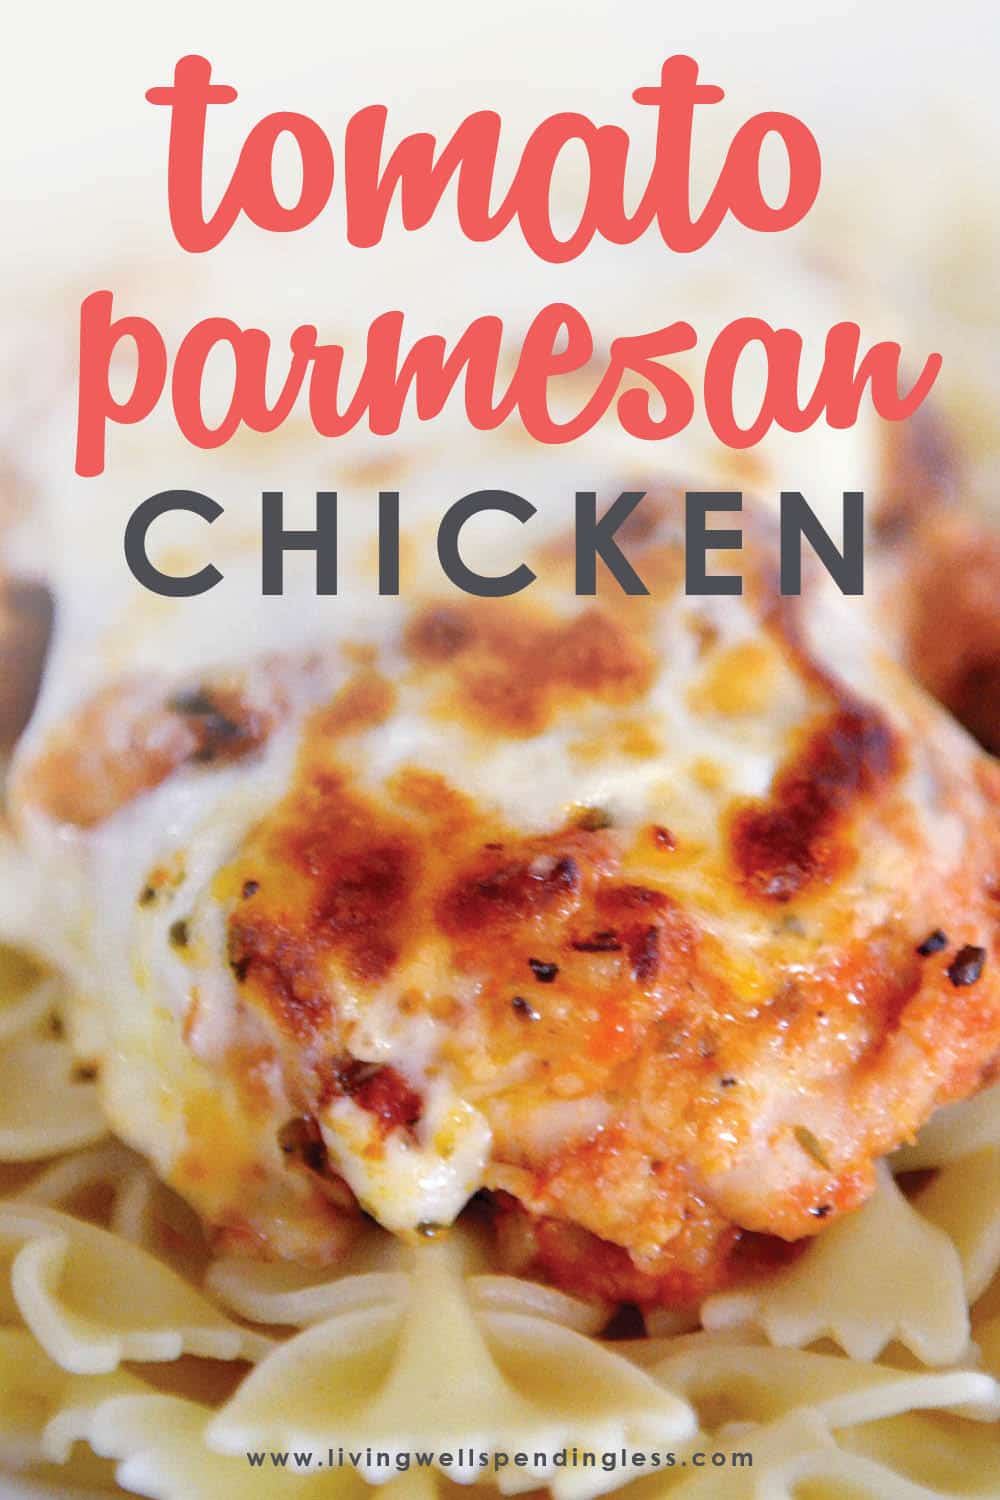 Love Chicken Parmesan? This easy Tomato Parmesan Chicken gives you all of the flavor with none of the effort. Whips up in minutes and freezer friendly too!